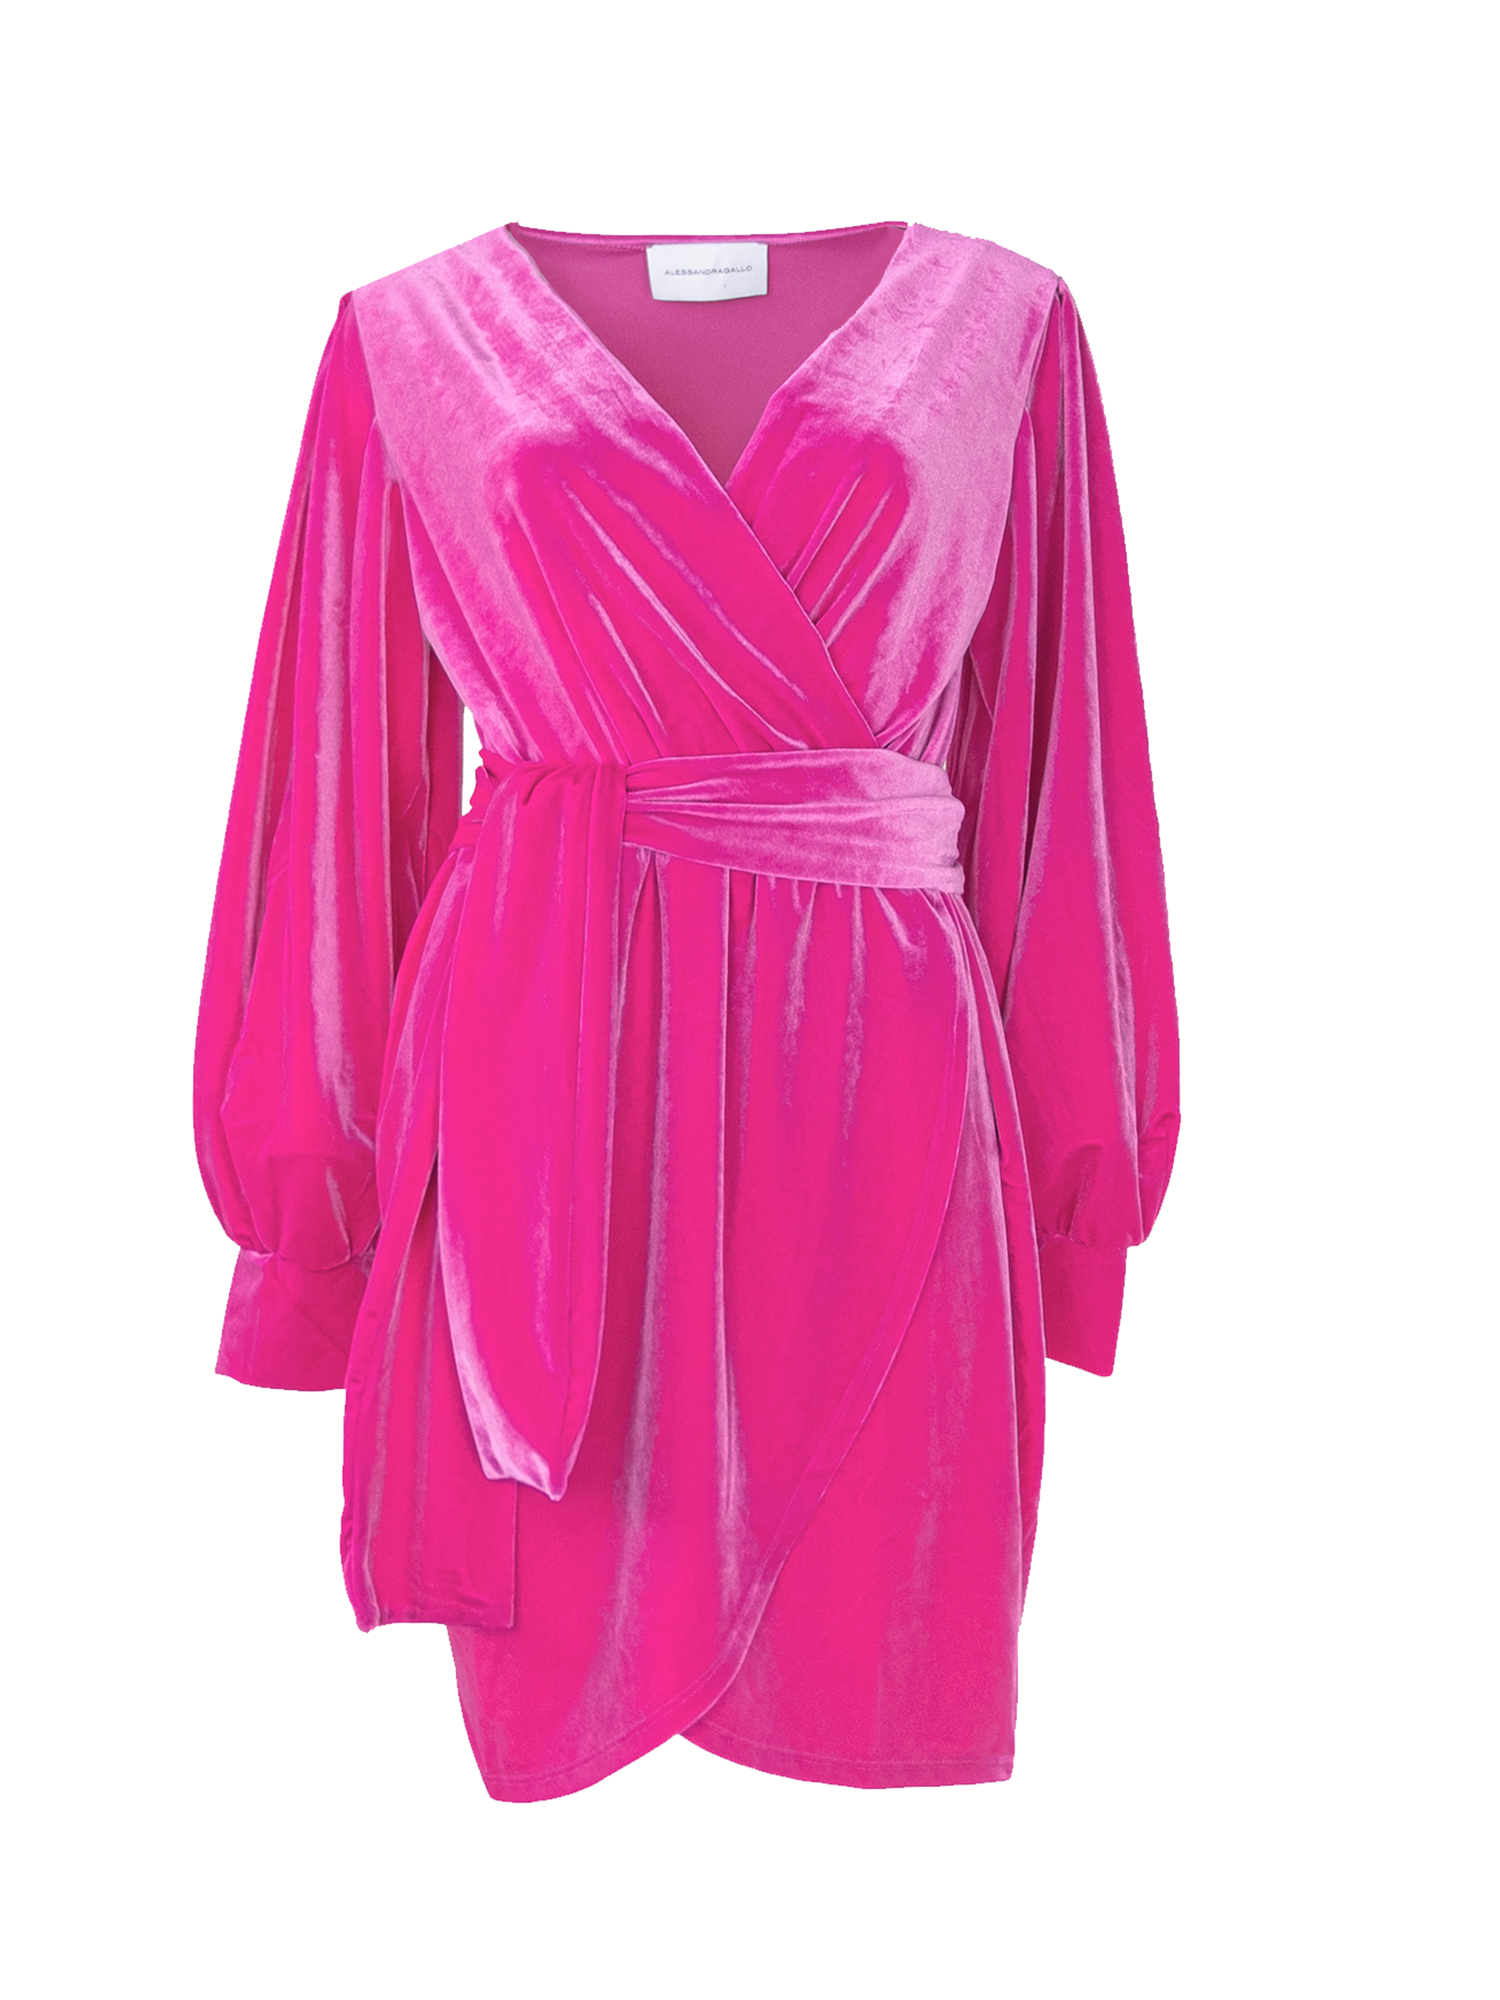 OFELIA - short dress with wide sleeve and sash in fuchsia chenille